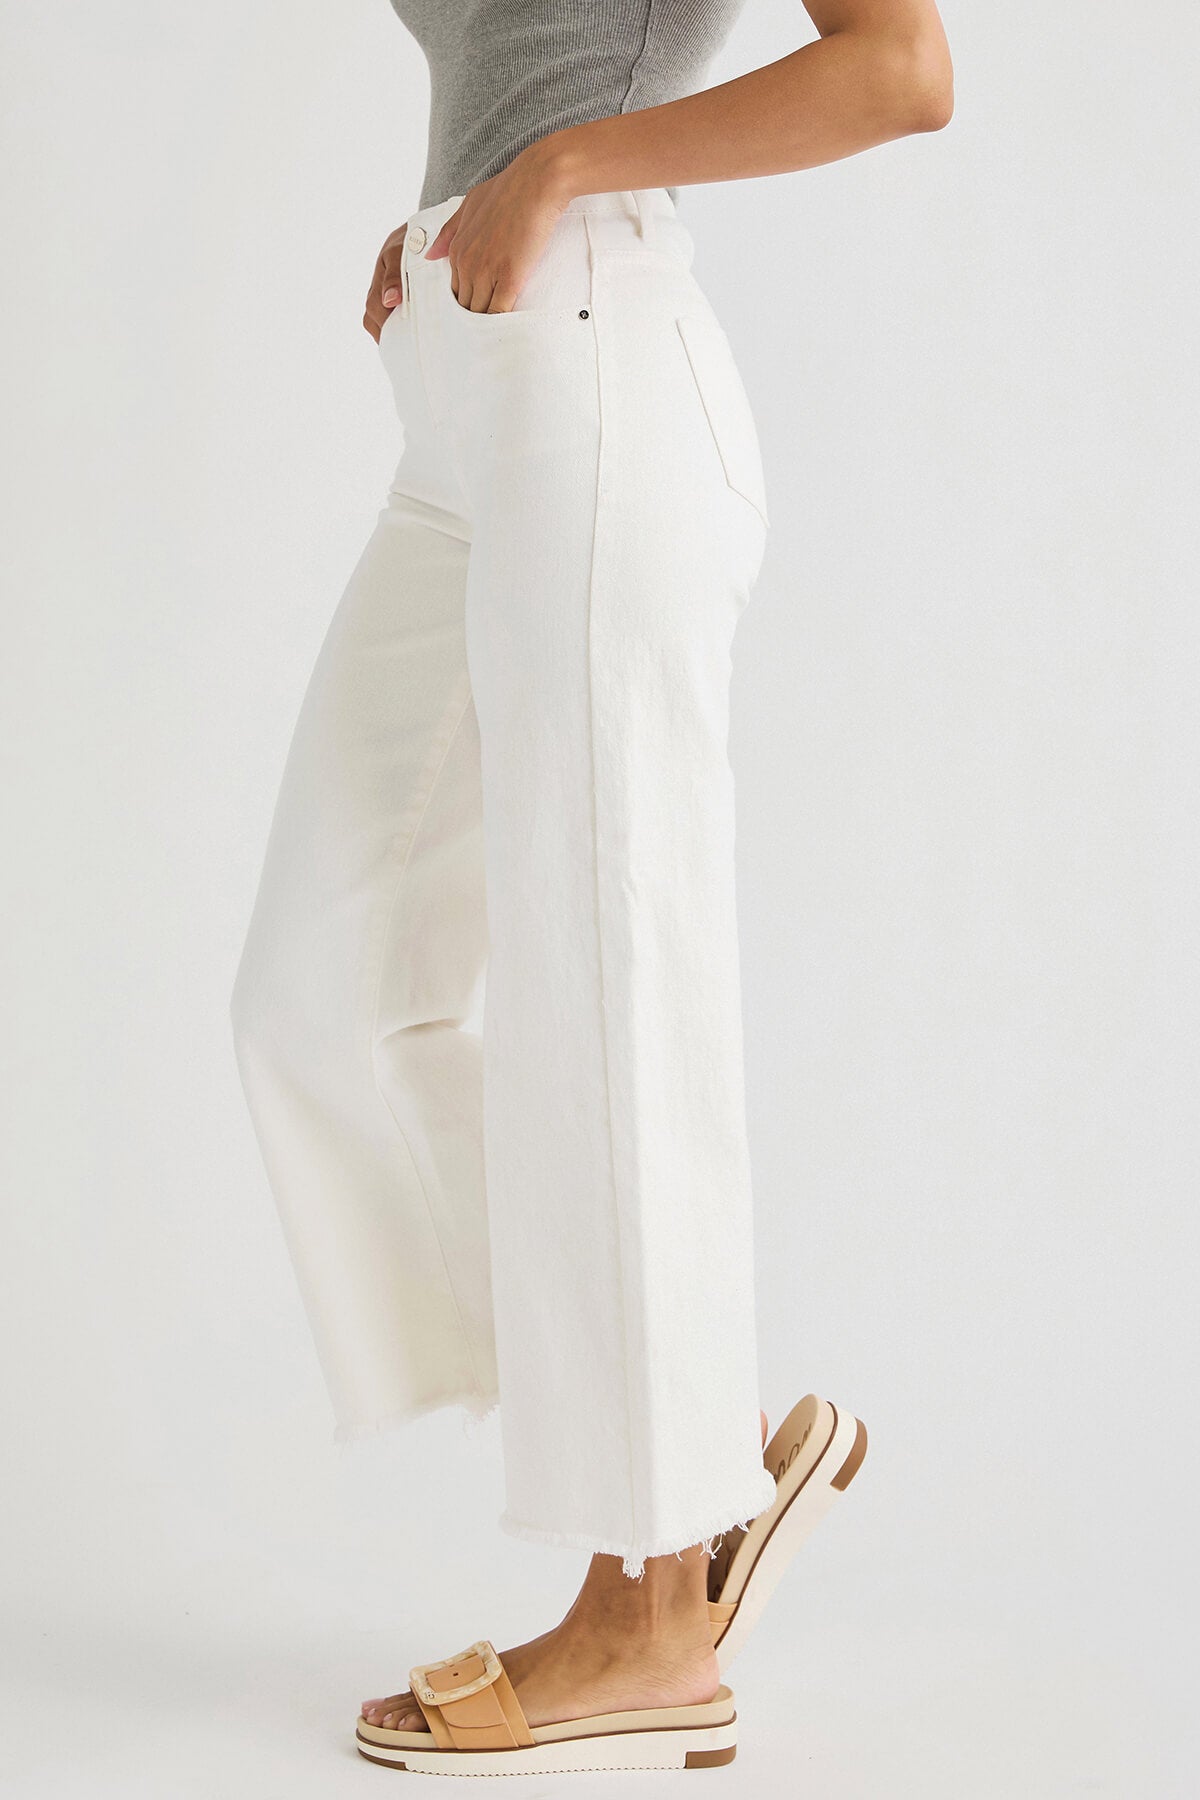 Womens' Wide Leg Crop High Rise Pants Relaxed Fit A New Day White